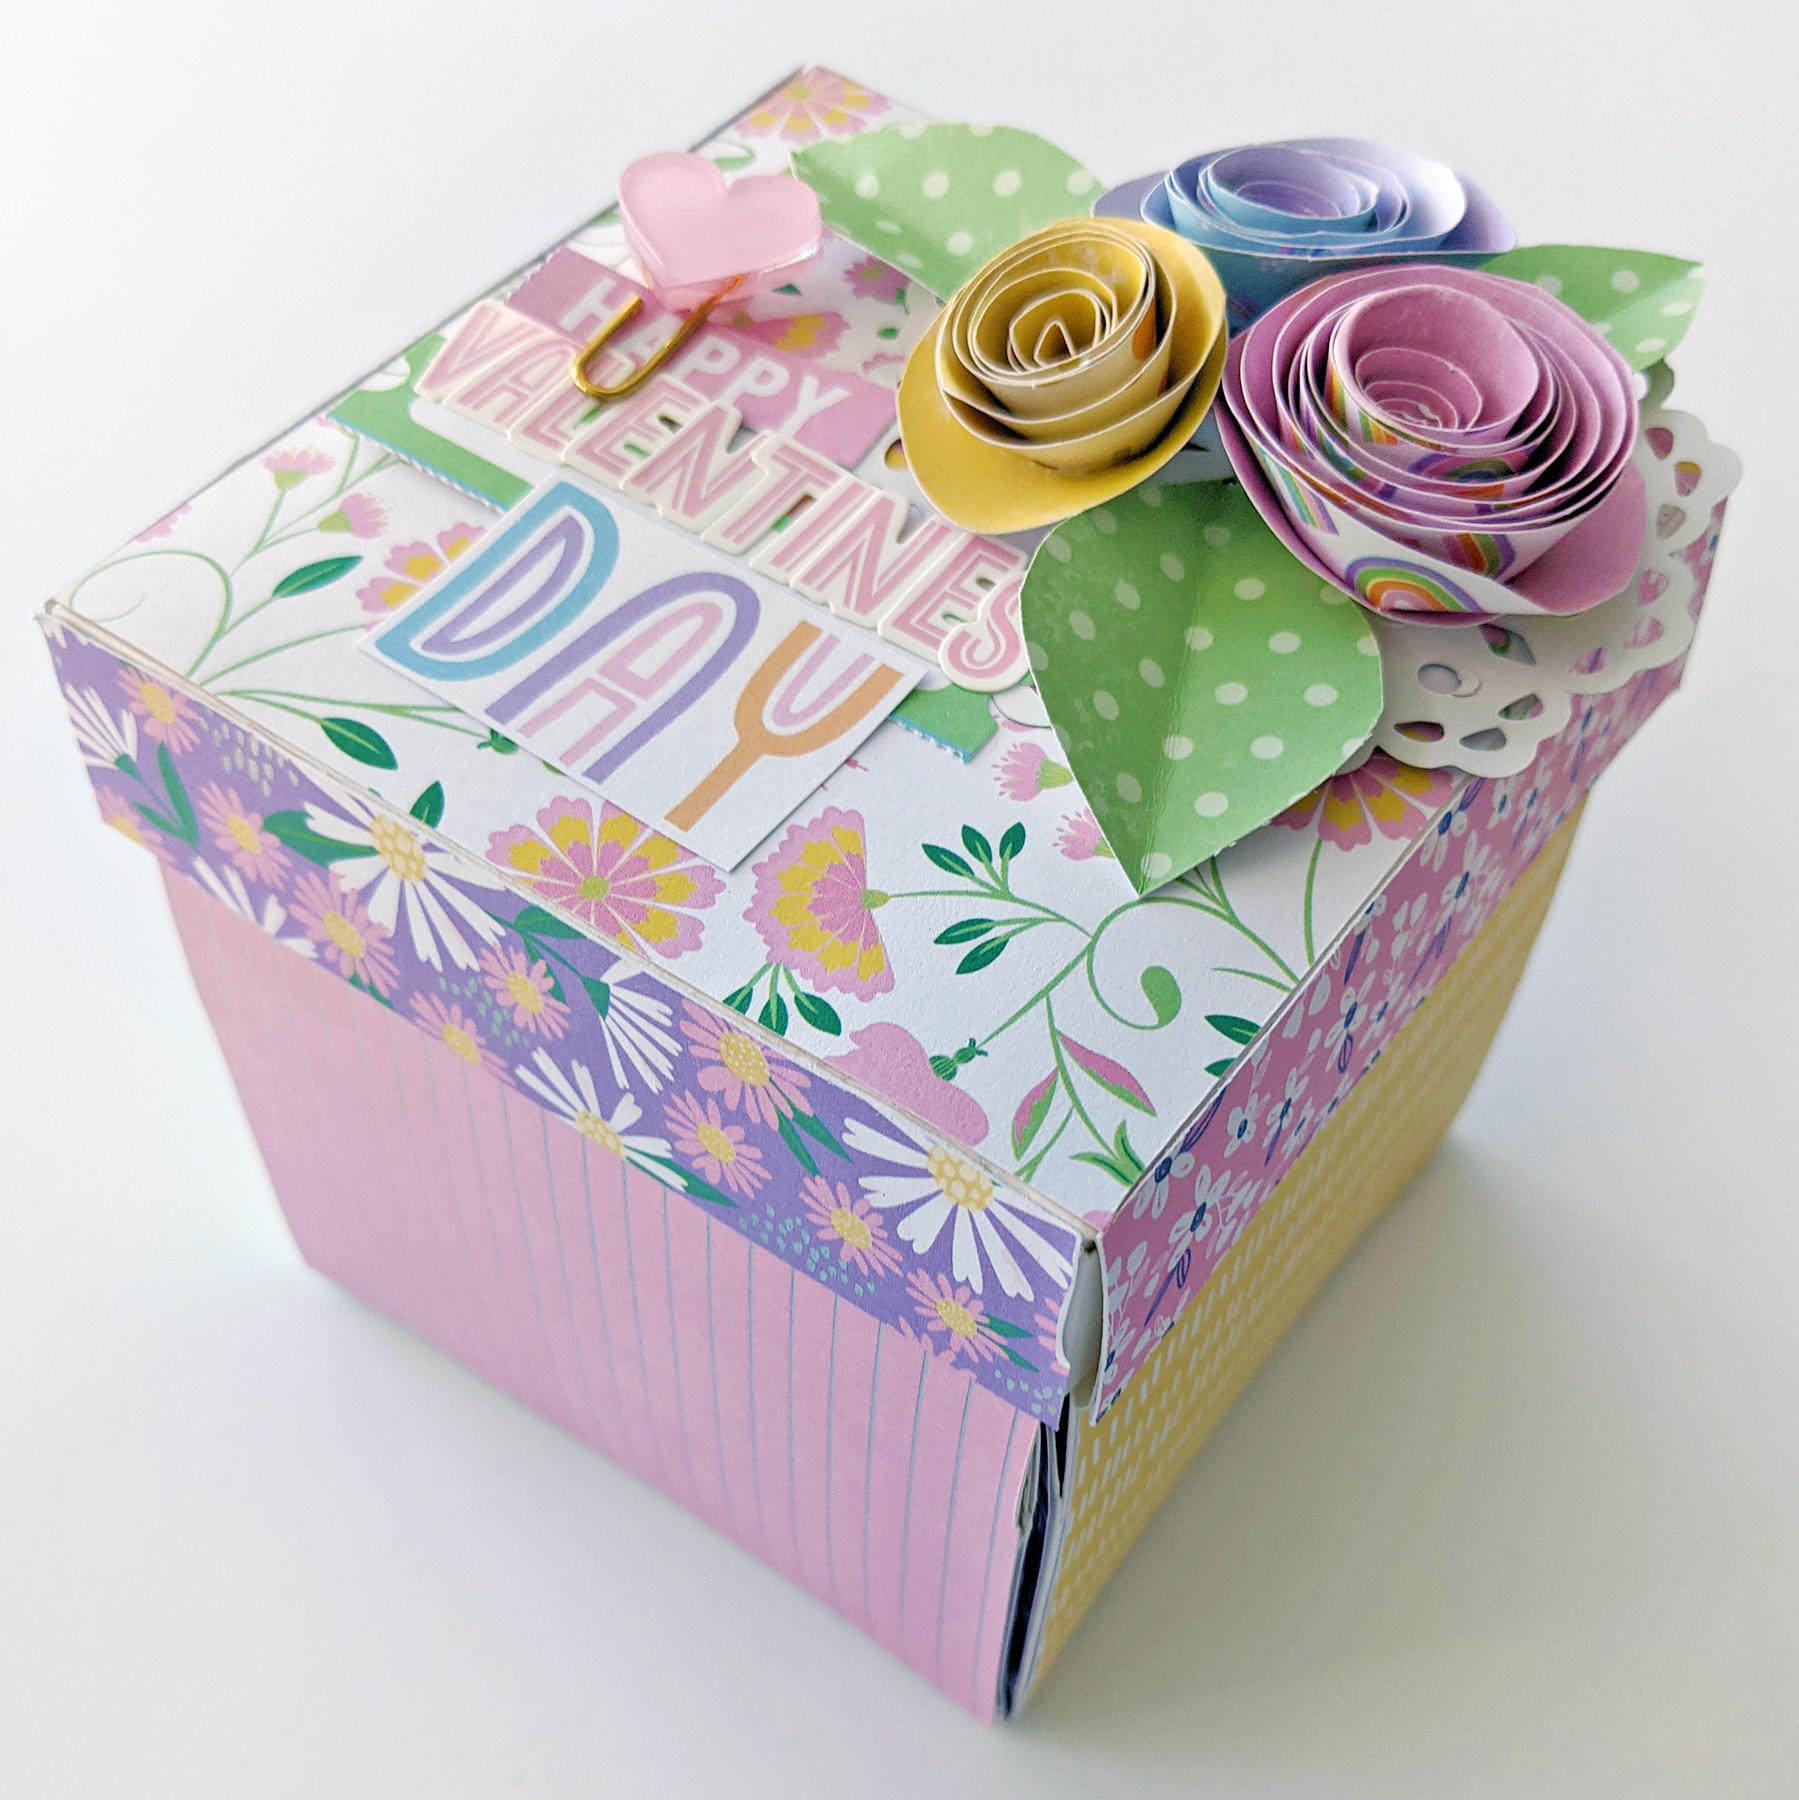 Valentine's Day Explosion Box, Projects